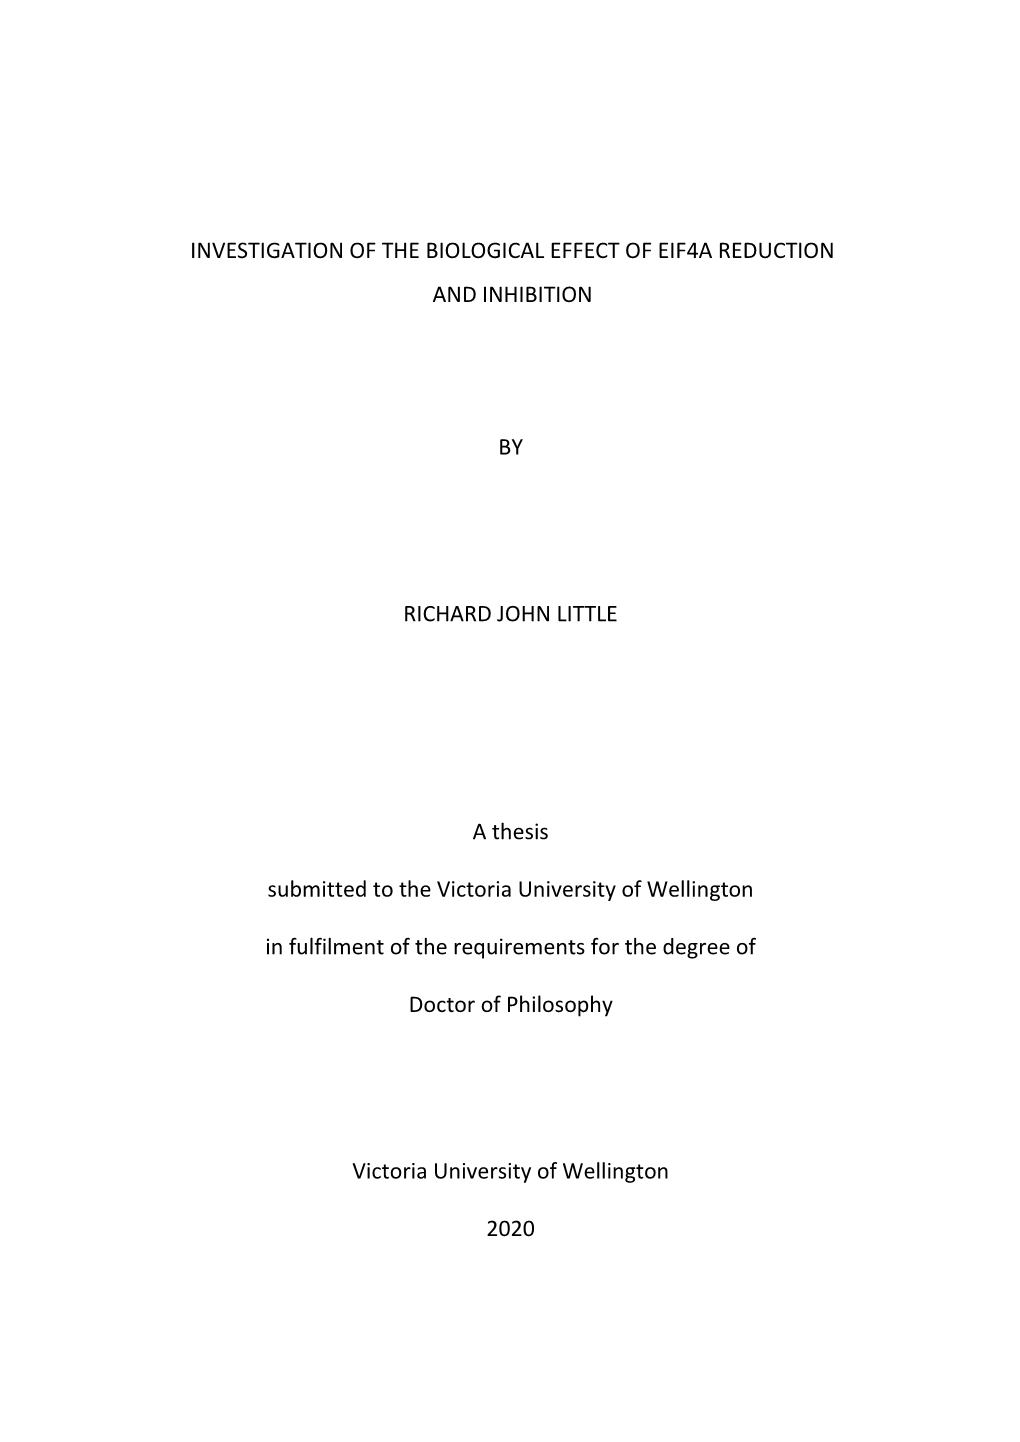 INVESTIGATION of the BIOLOGICAL EFFECT of EIF4A REDUCTION and INHIBITION by RICHARD JOHN LITTLE a Thesis Submitted to the Victor